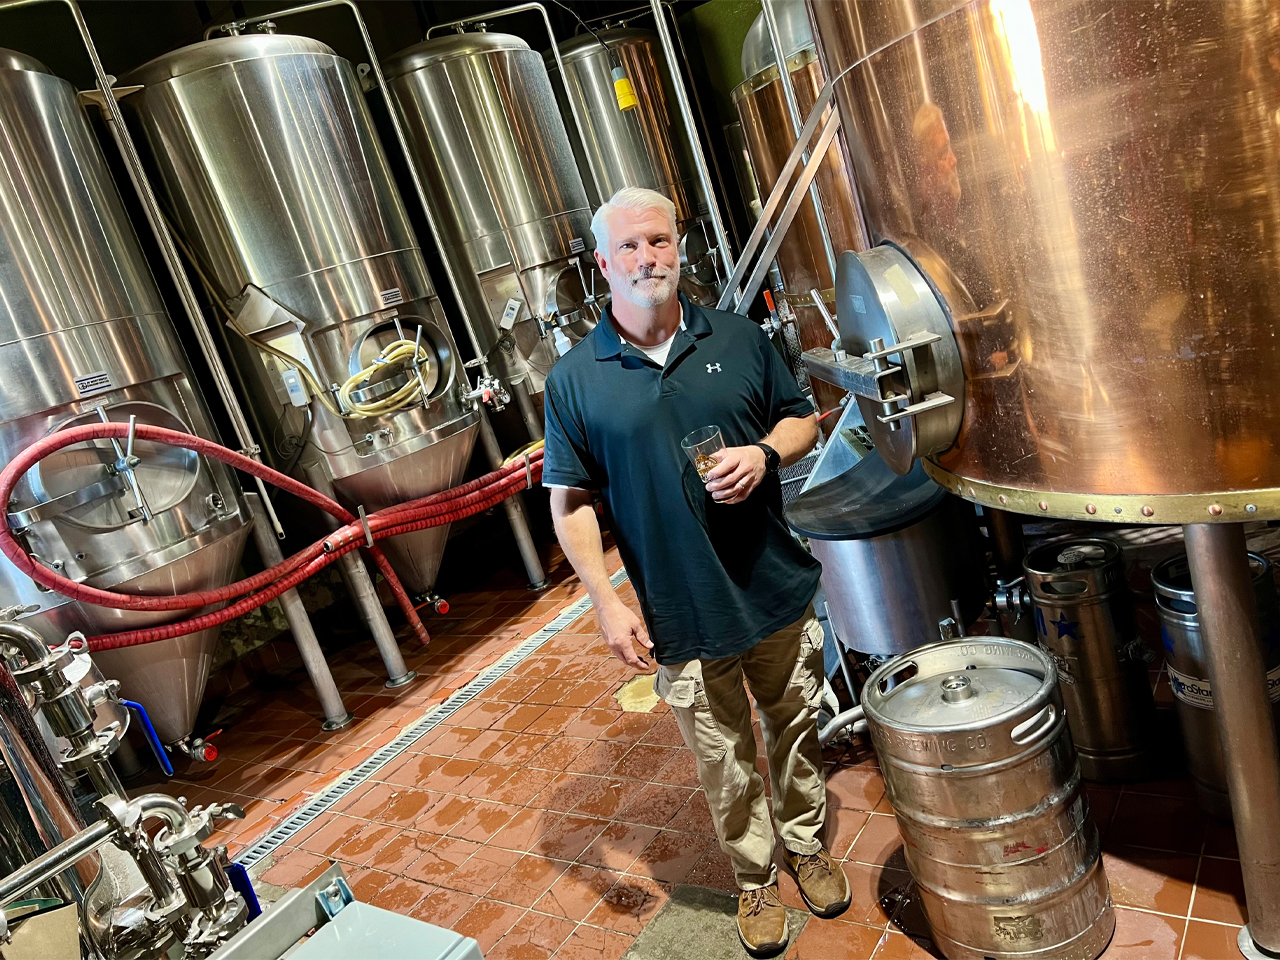 Mike Sipowicz in the brew room at Triple J Chophouse & Brew Co. in Lubbock, Texas